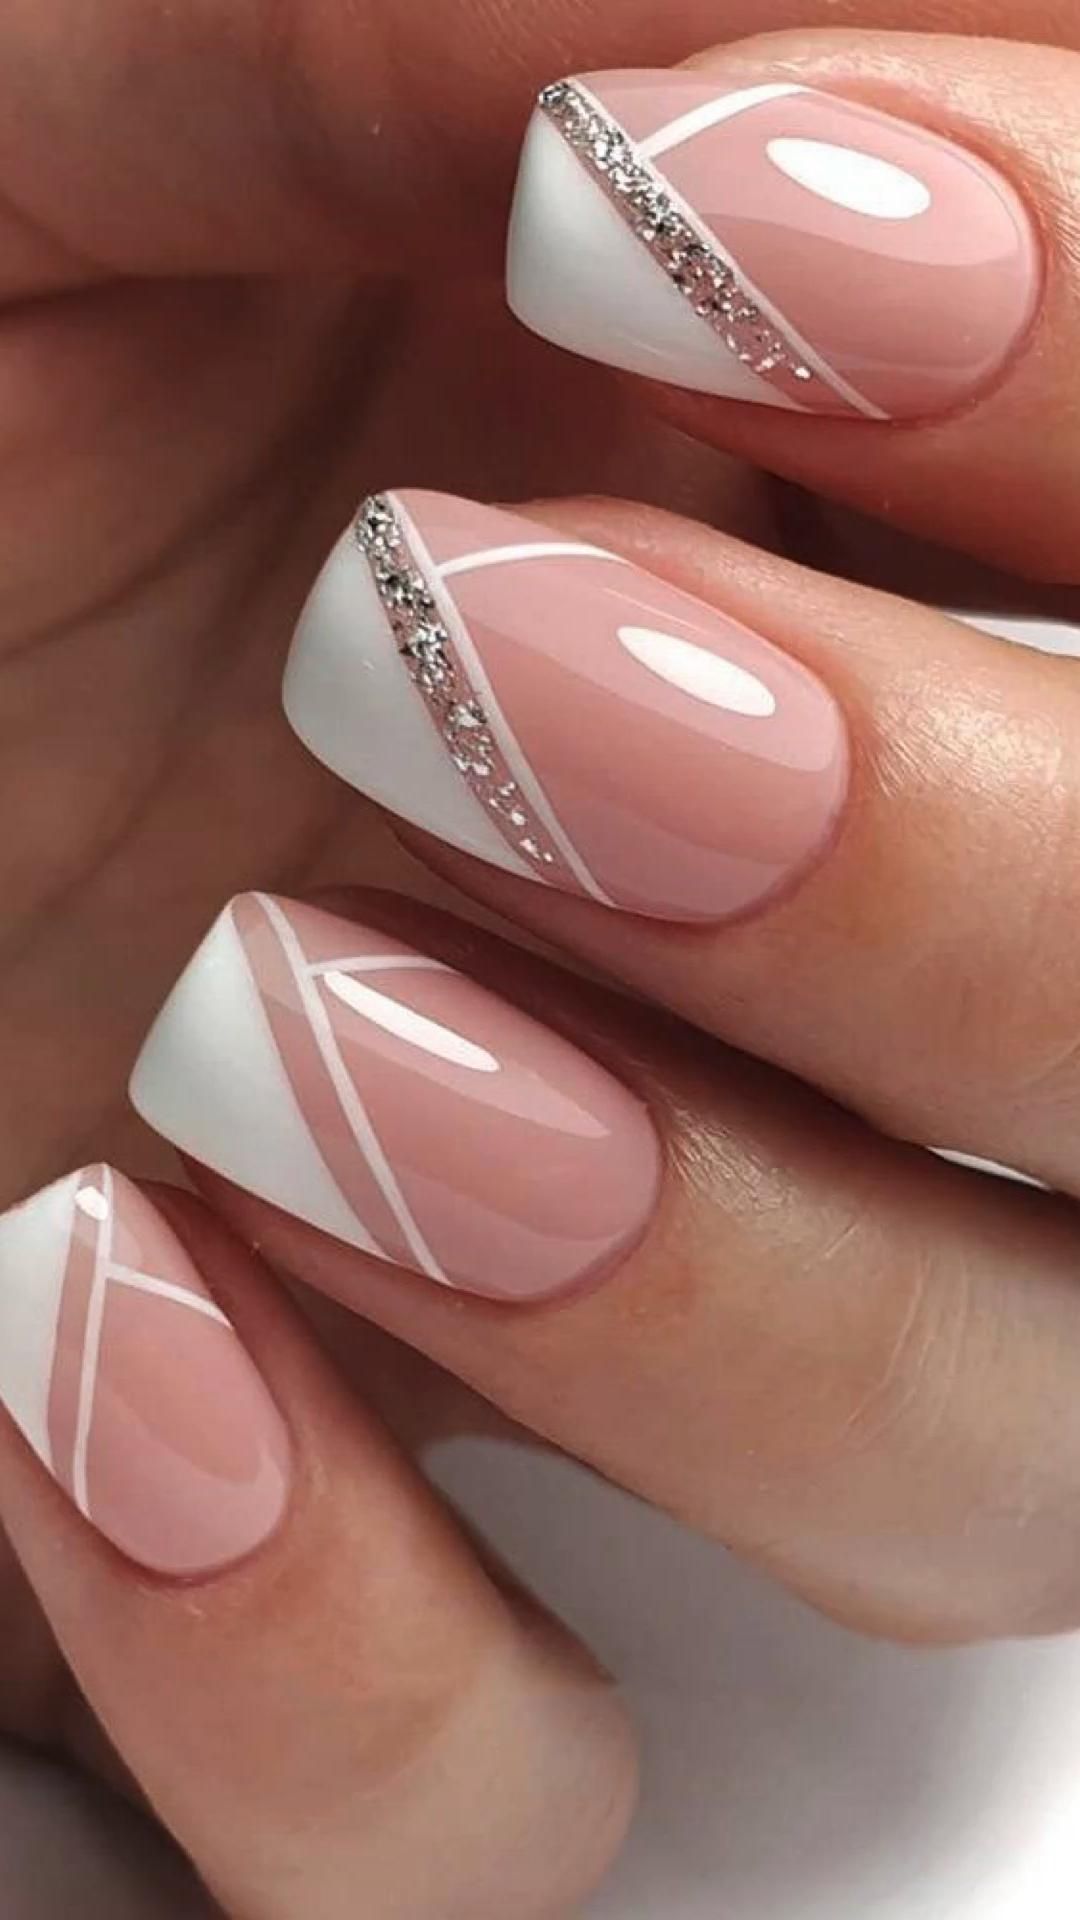 30+ Line Nail Art Designs That Redefine Contemporary Chic